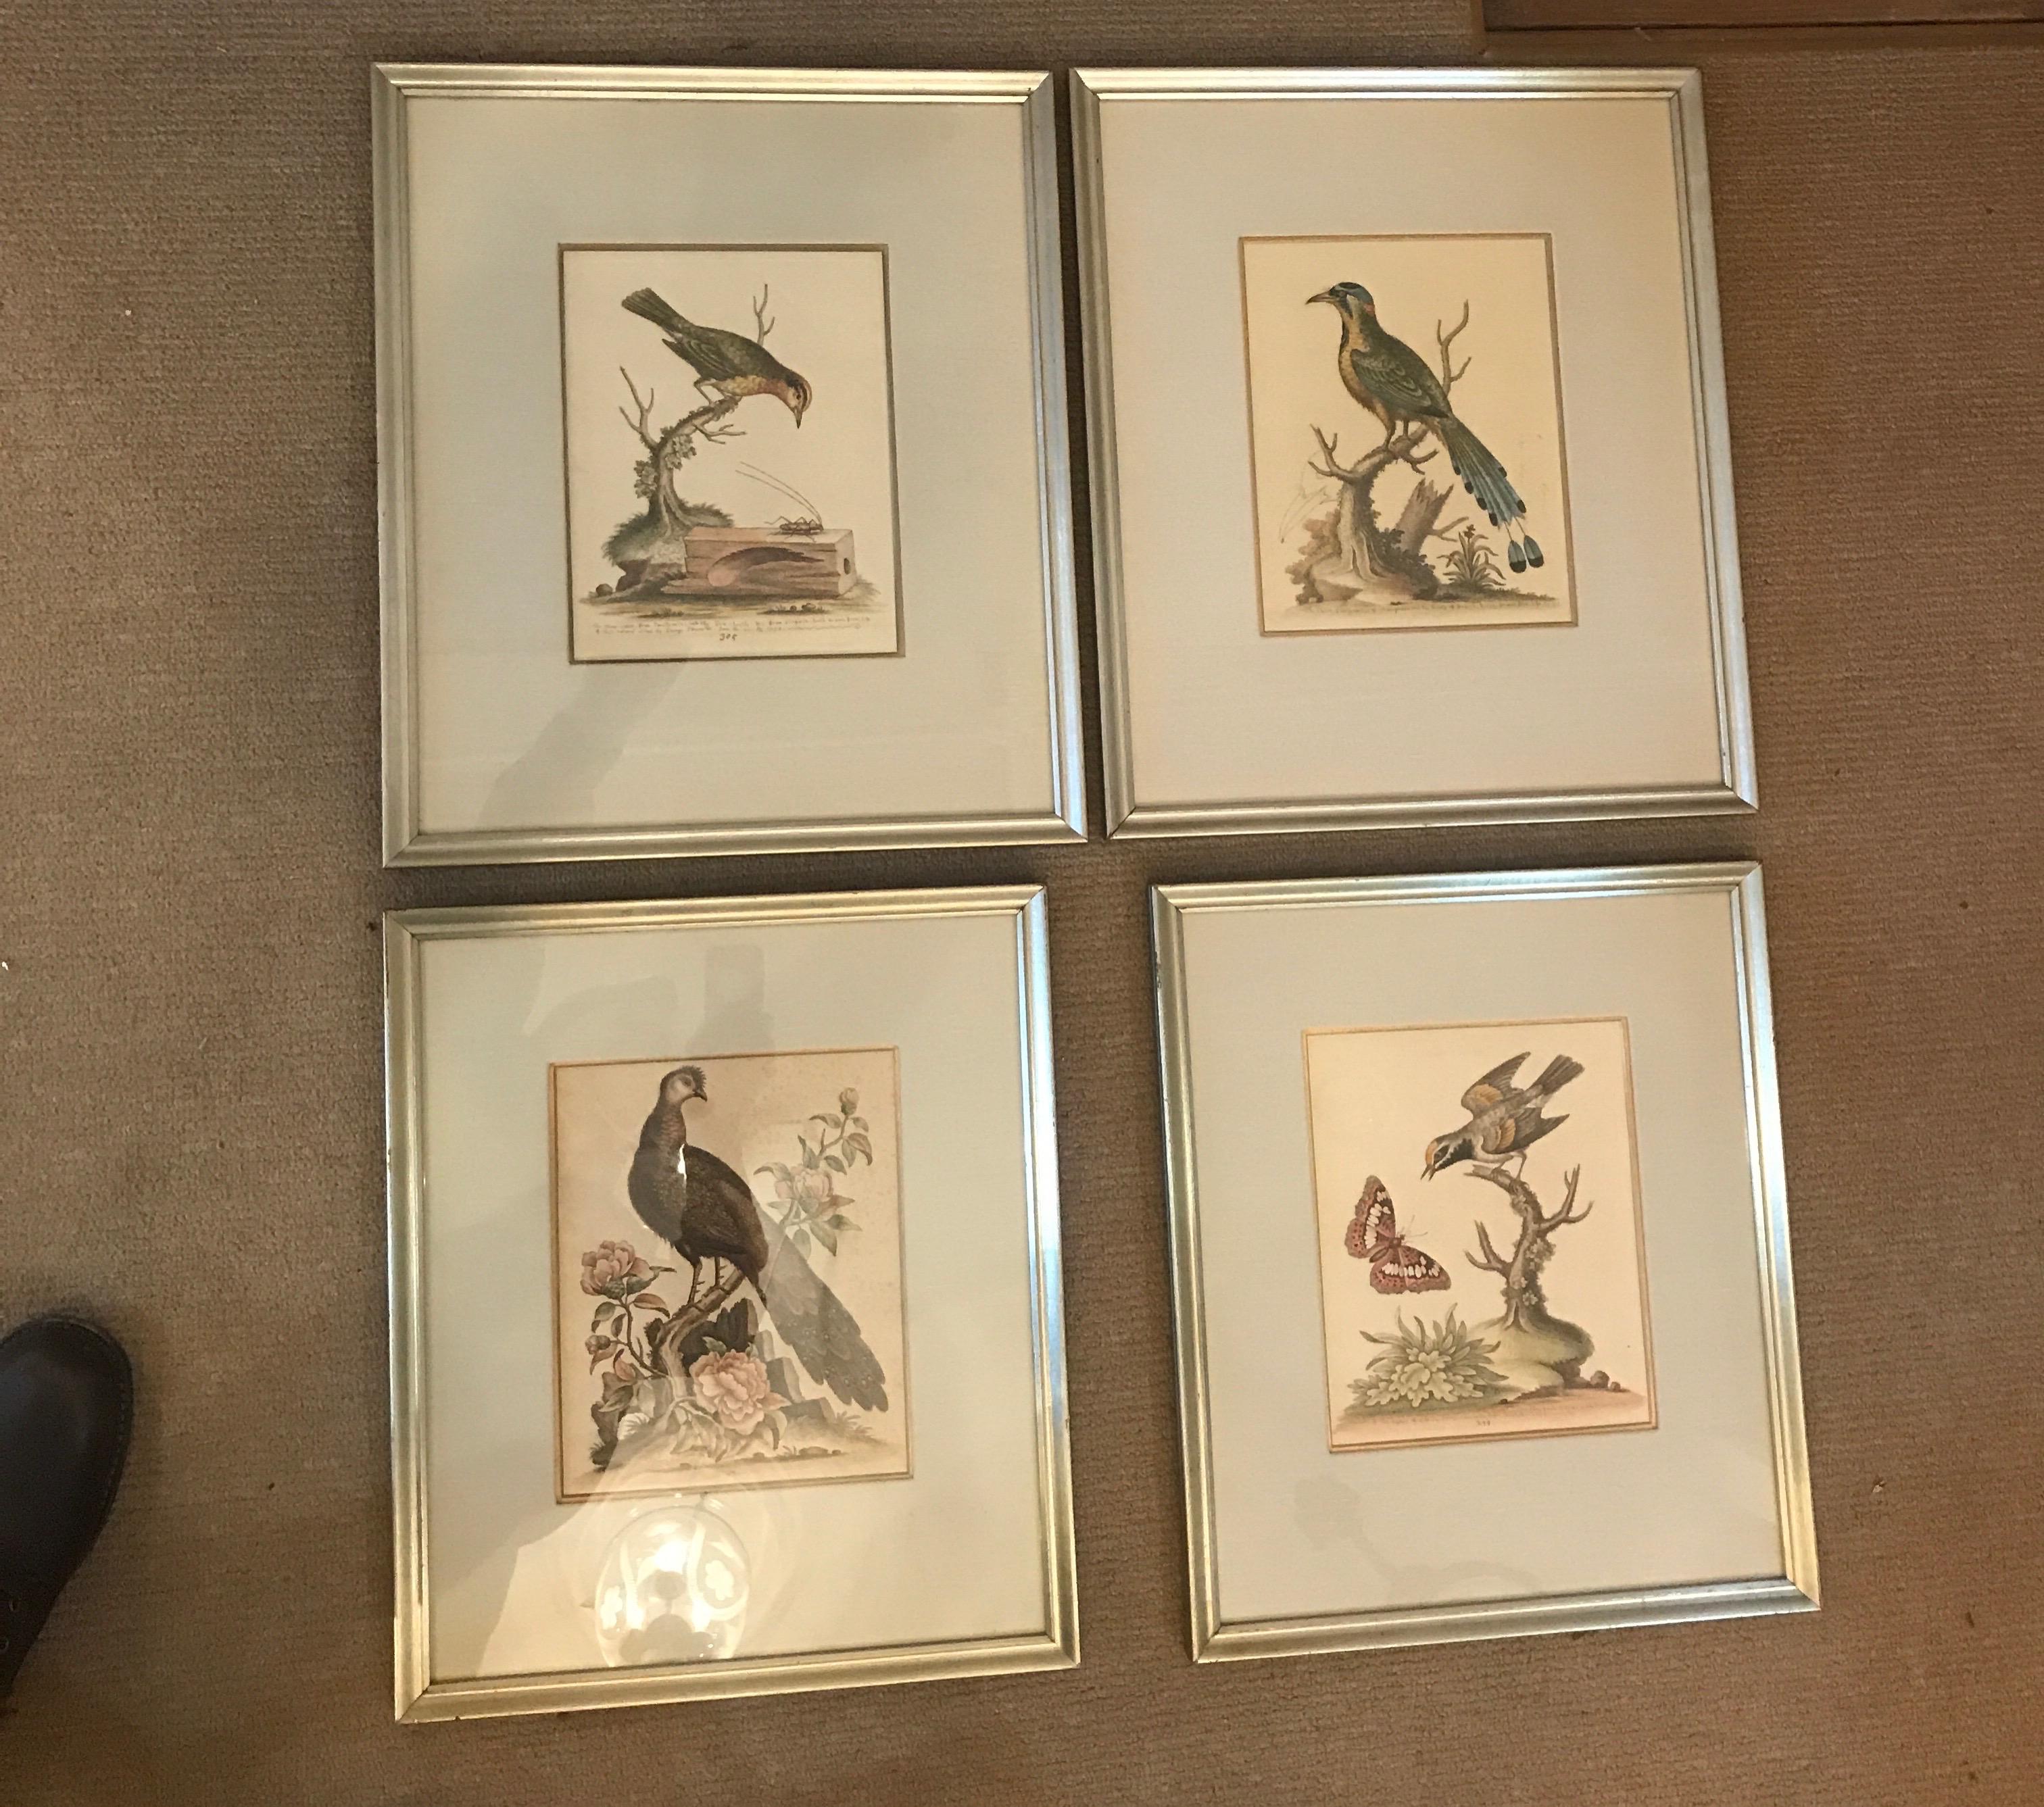 Two pairs, a total of four, hand colored copper printed engravings of birds, hand colored by George Edwards.  Each one with descriptive text.  This highly sough after British ornithologist from the mid-18th century.  Framed in the early 20th century